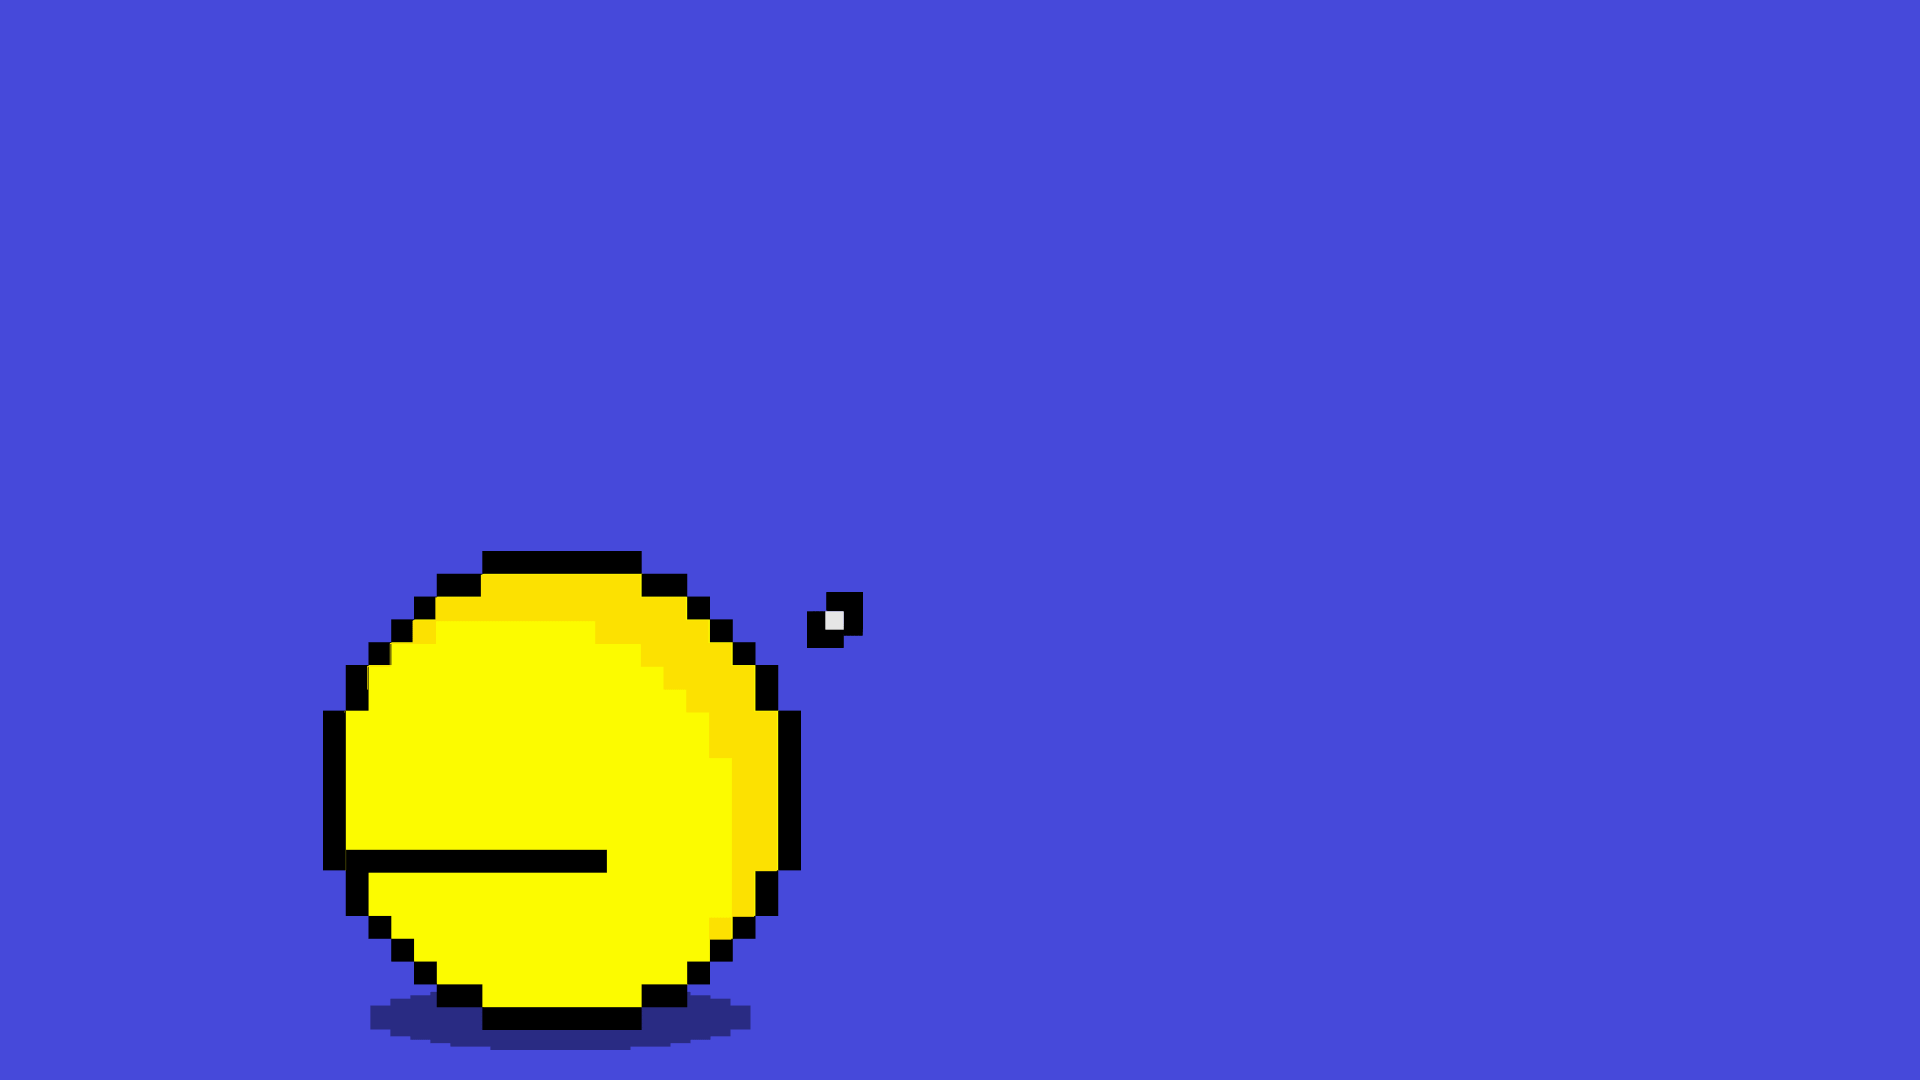 Animated GIF of a circular gaming character and a thought bubble